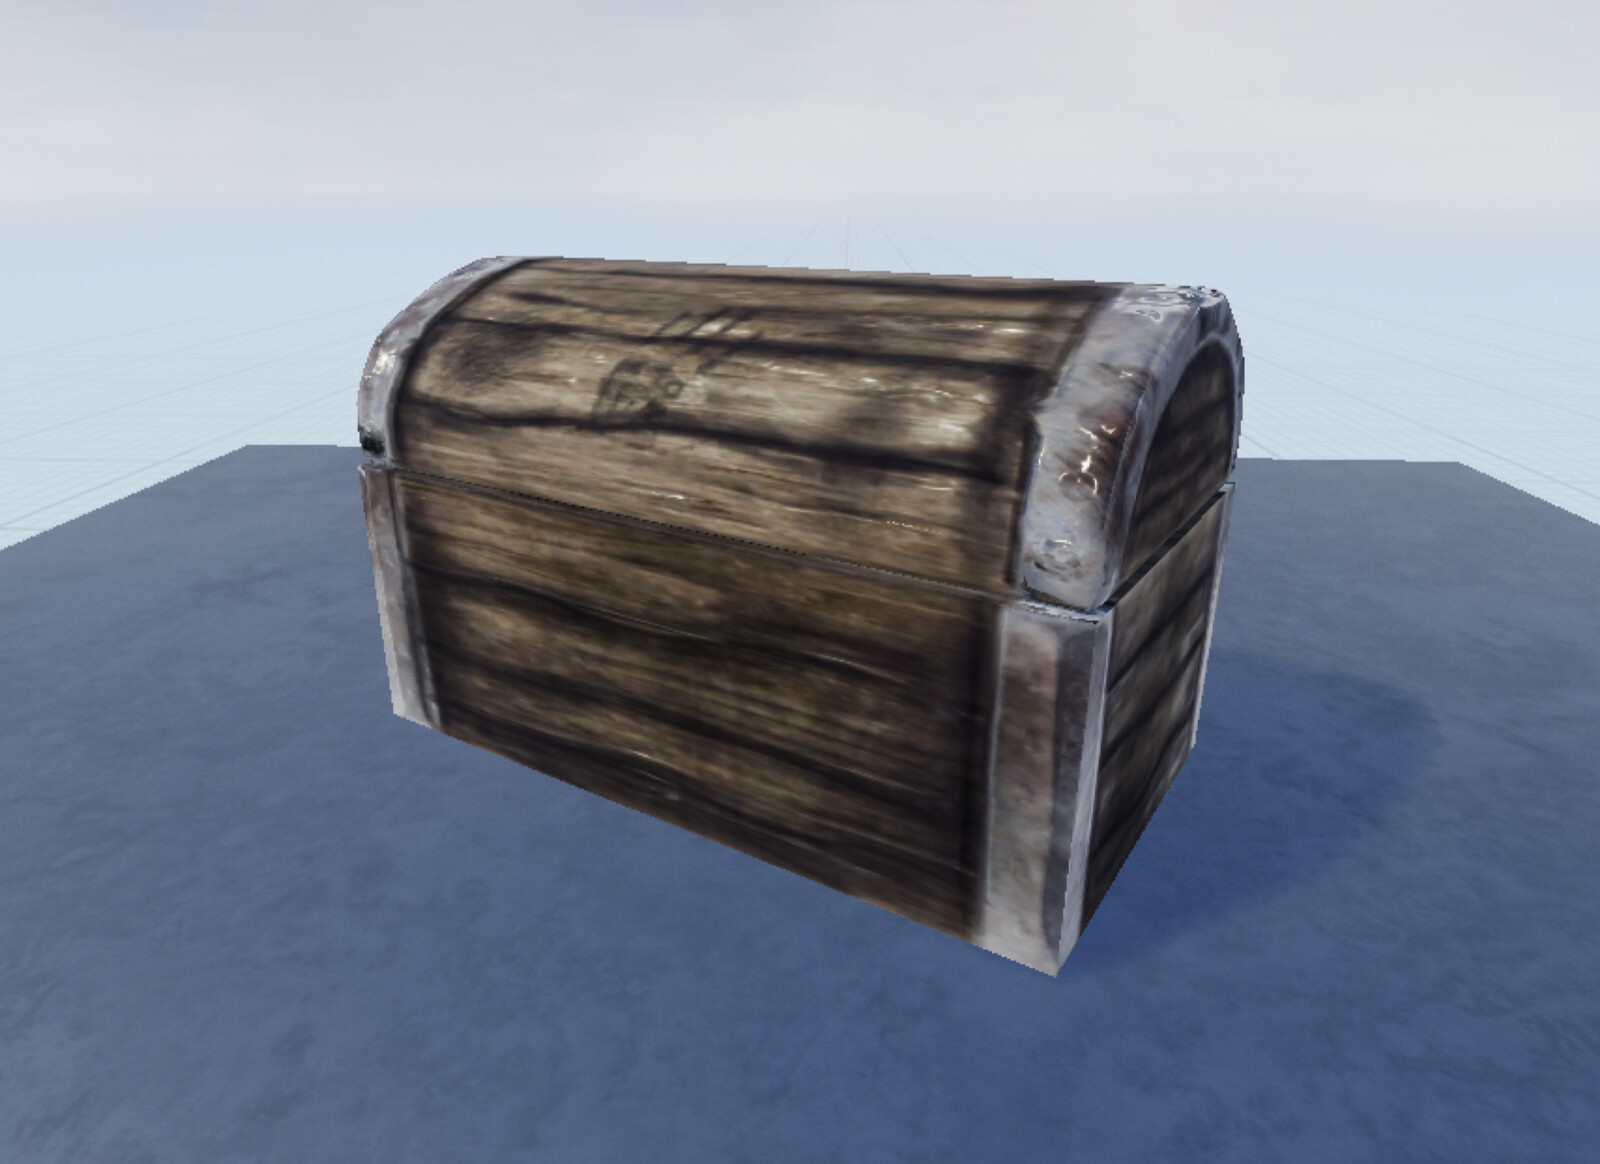 In-game unreal render of chest